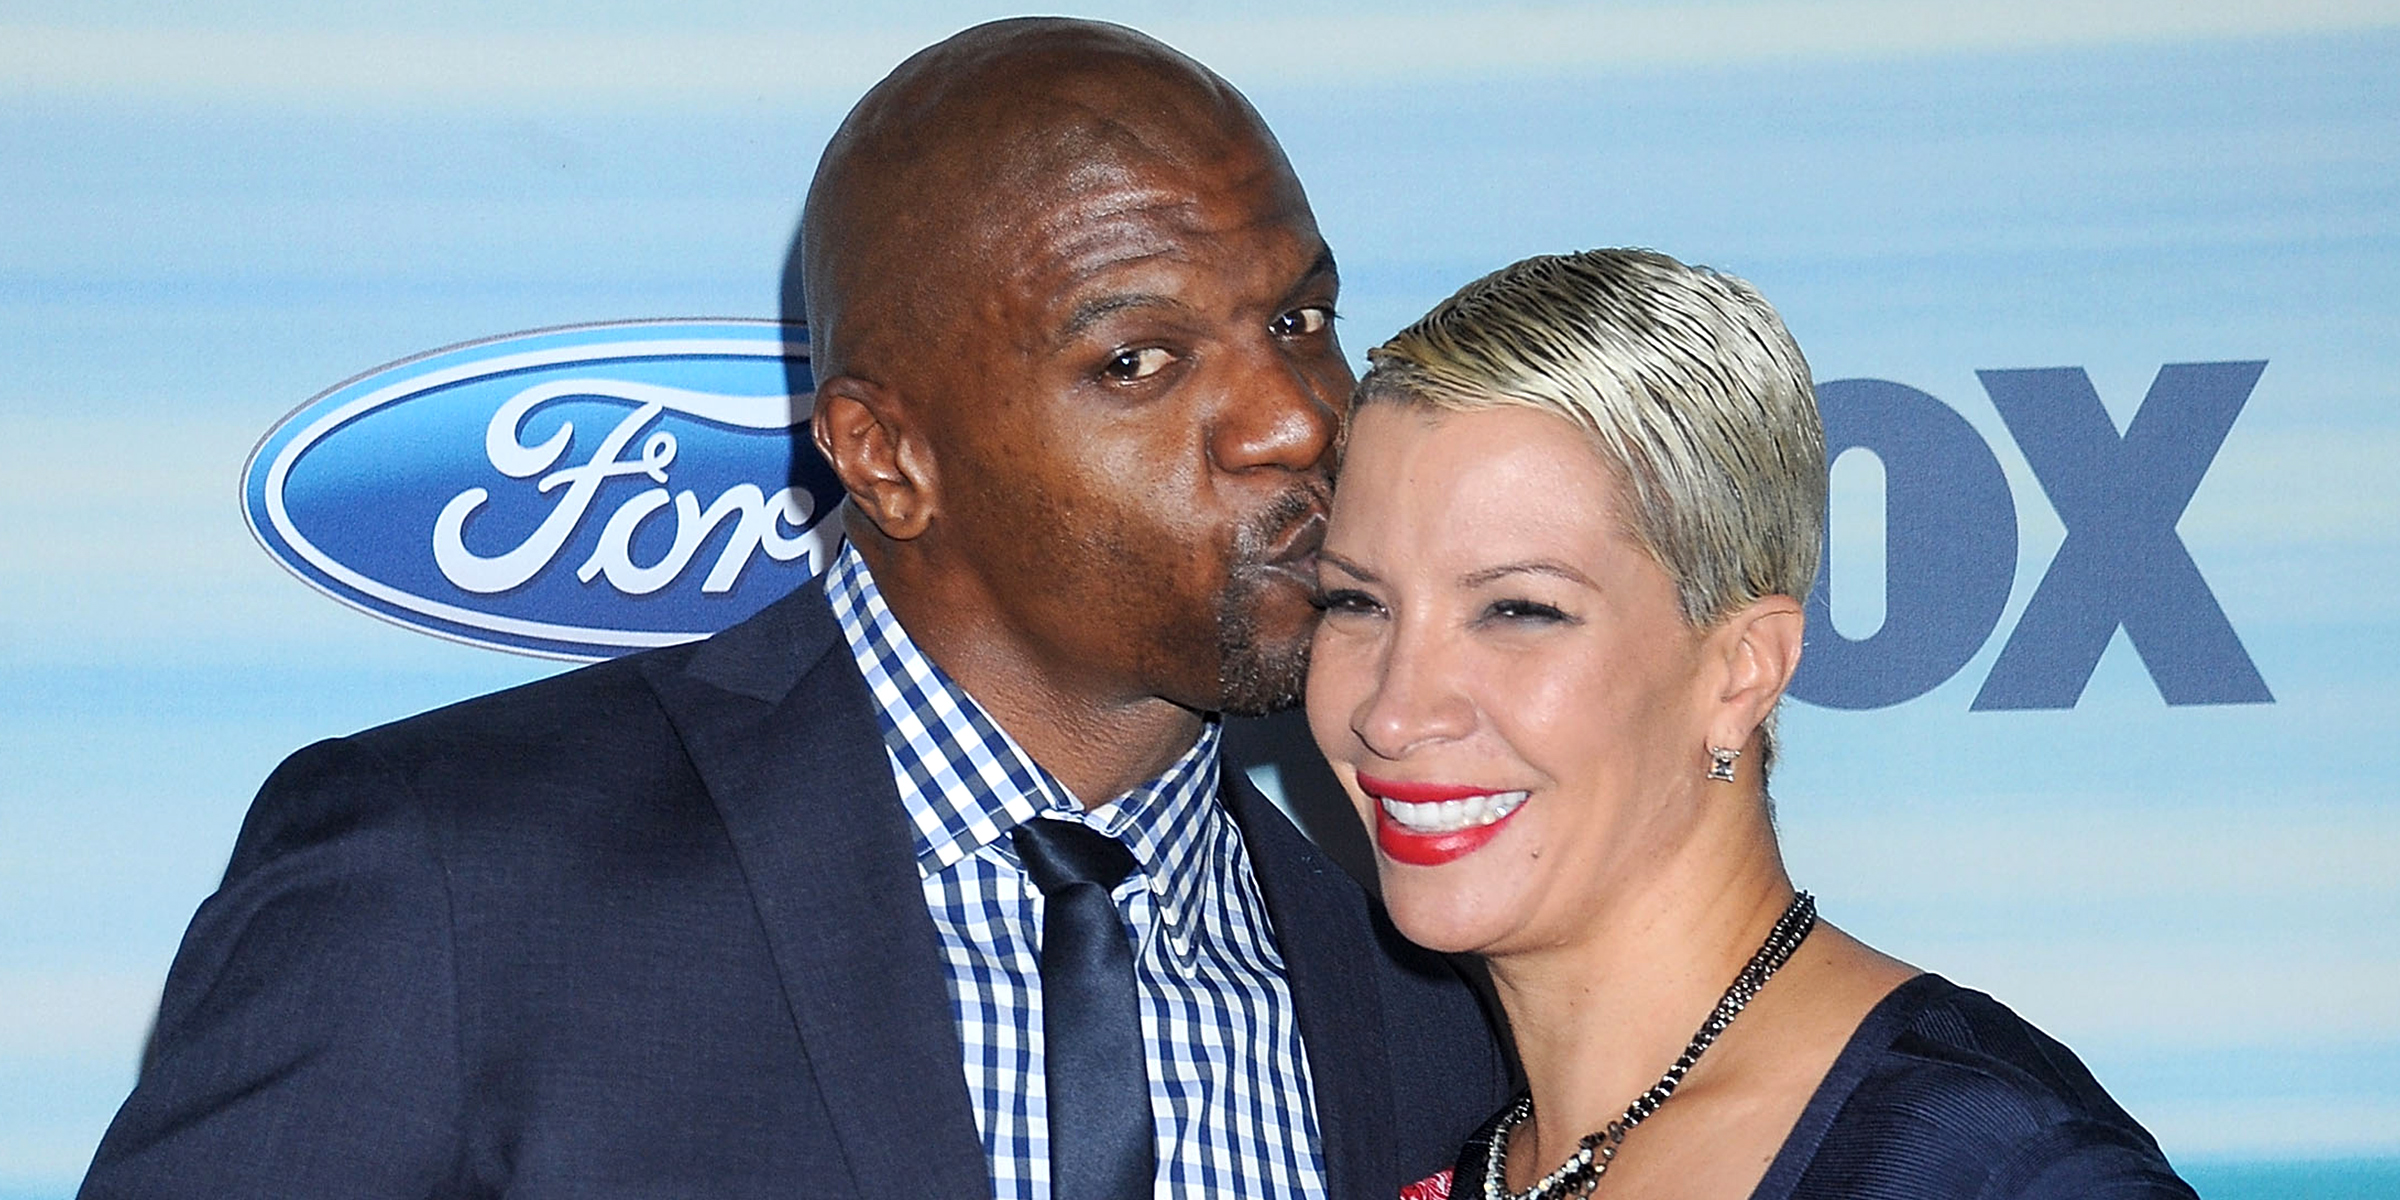 Terry y Rebecca King-Crews | Fuente: Getty Images